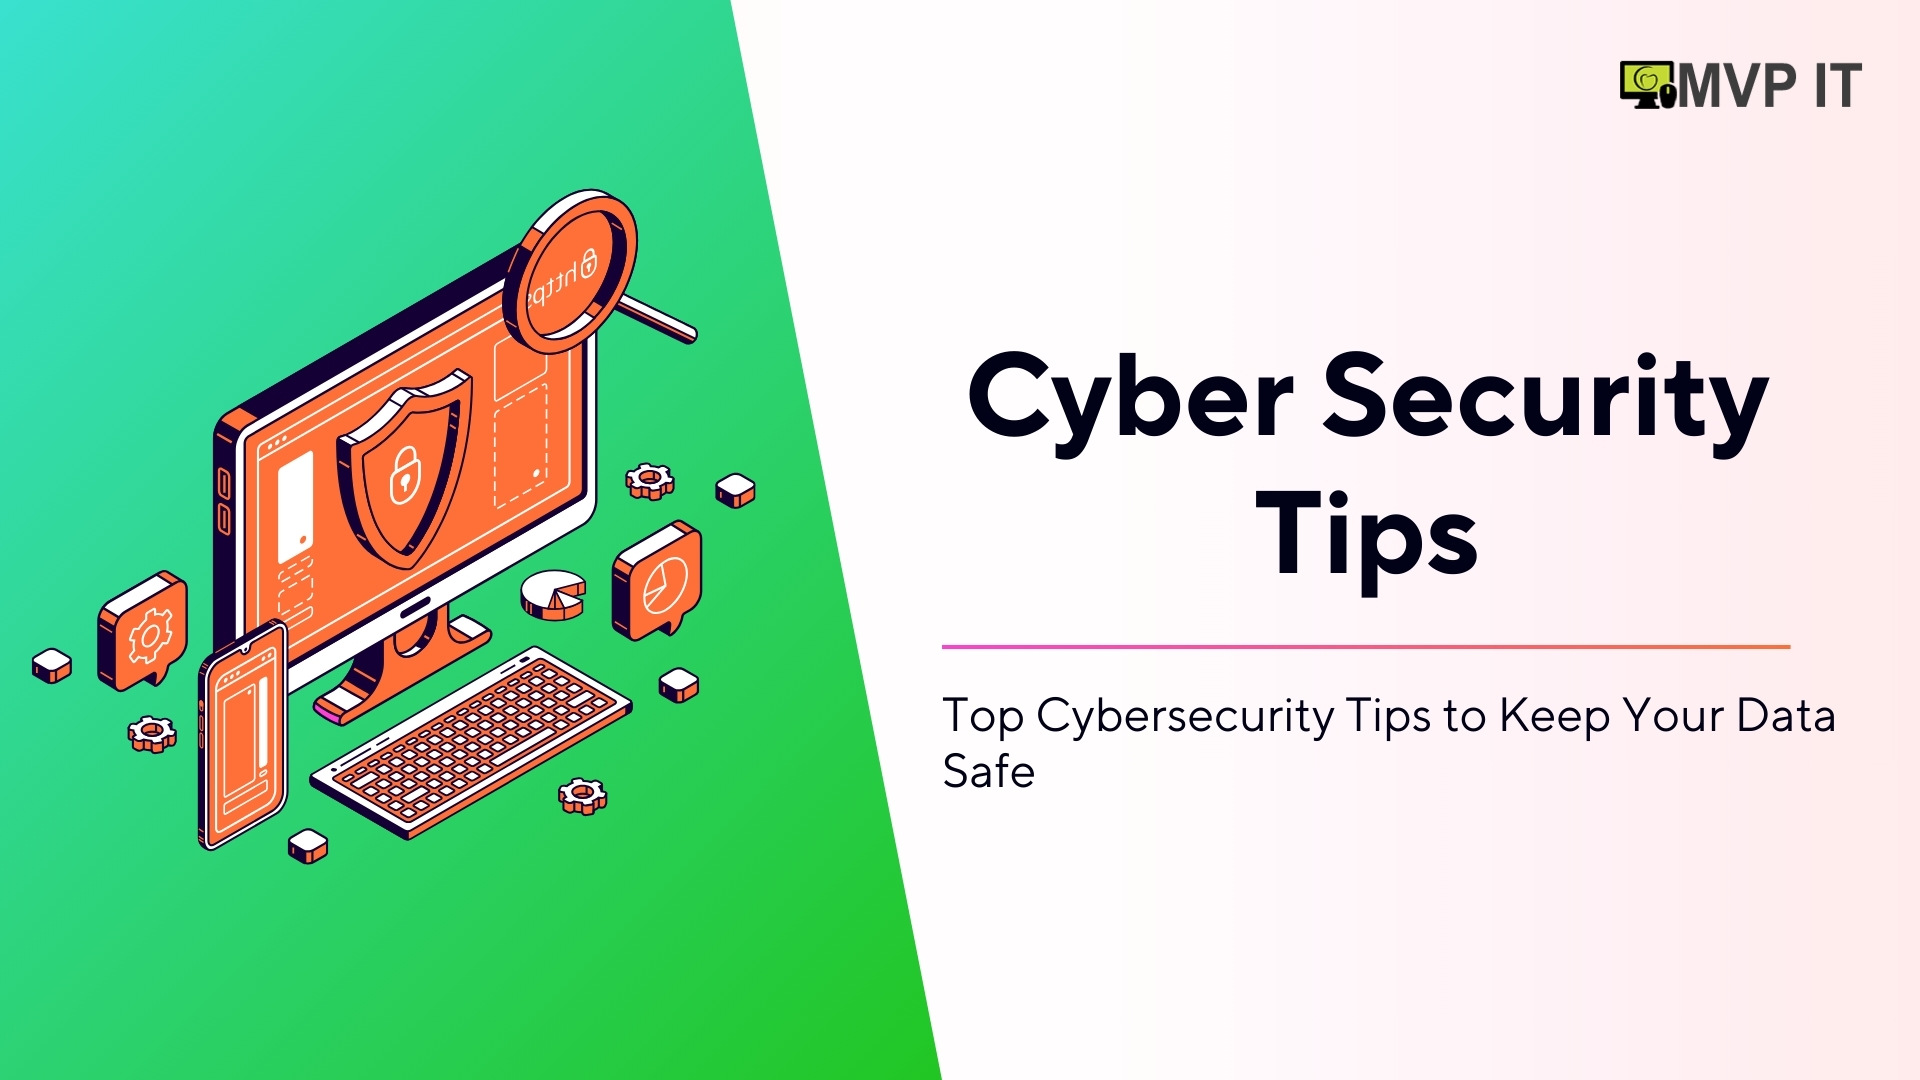 Top Cybersecurity Tips to Keep Your Data Safe